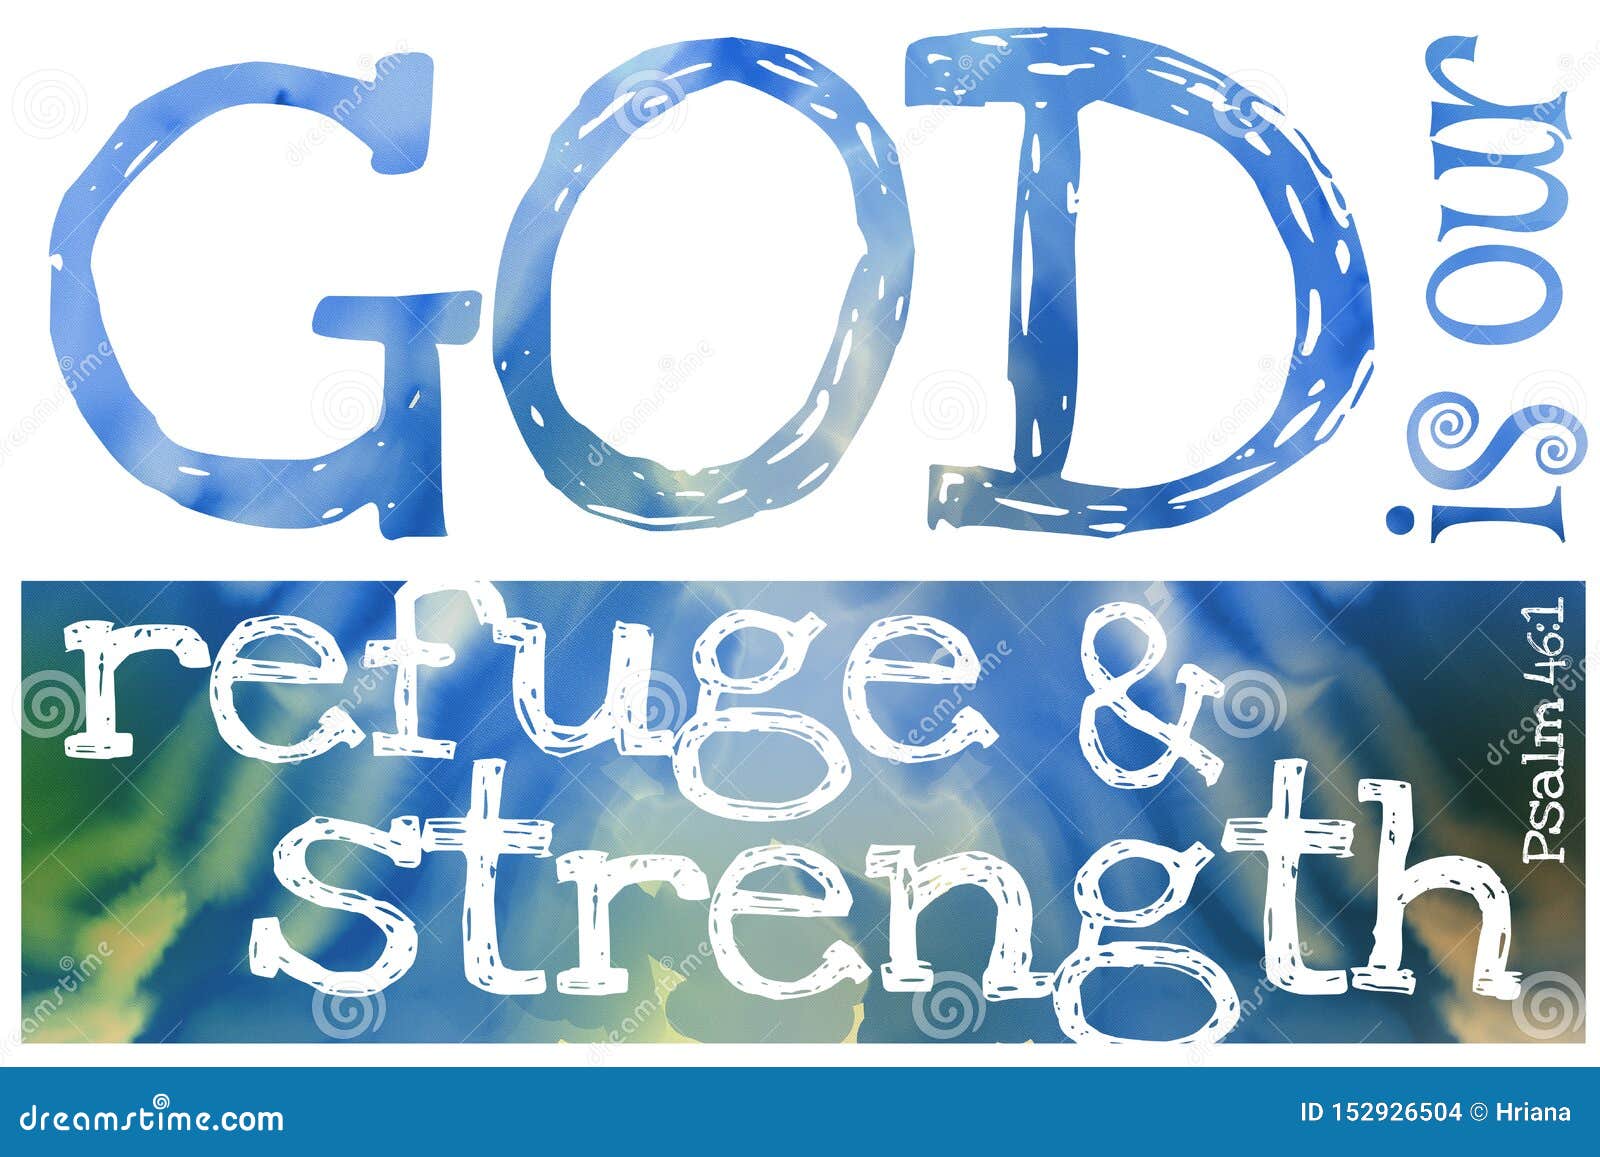 god is our refuge and strength psalm 46:1 - poster with bible text quotation